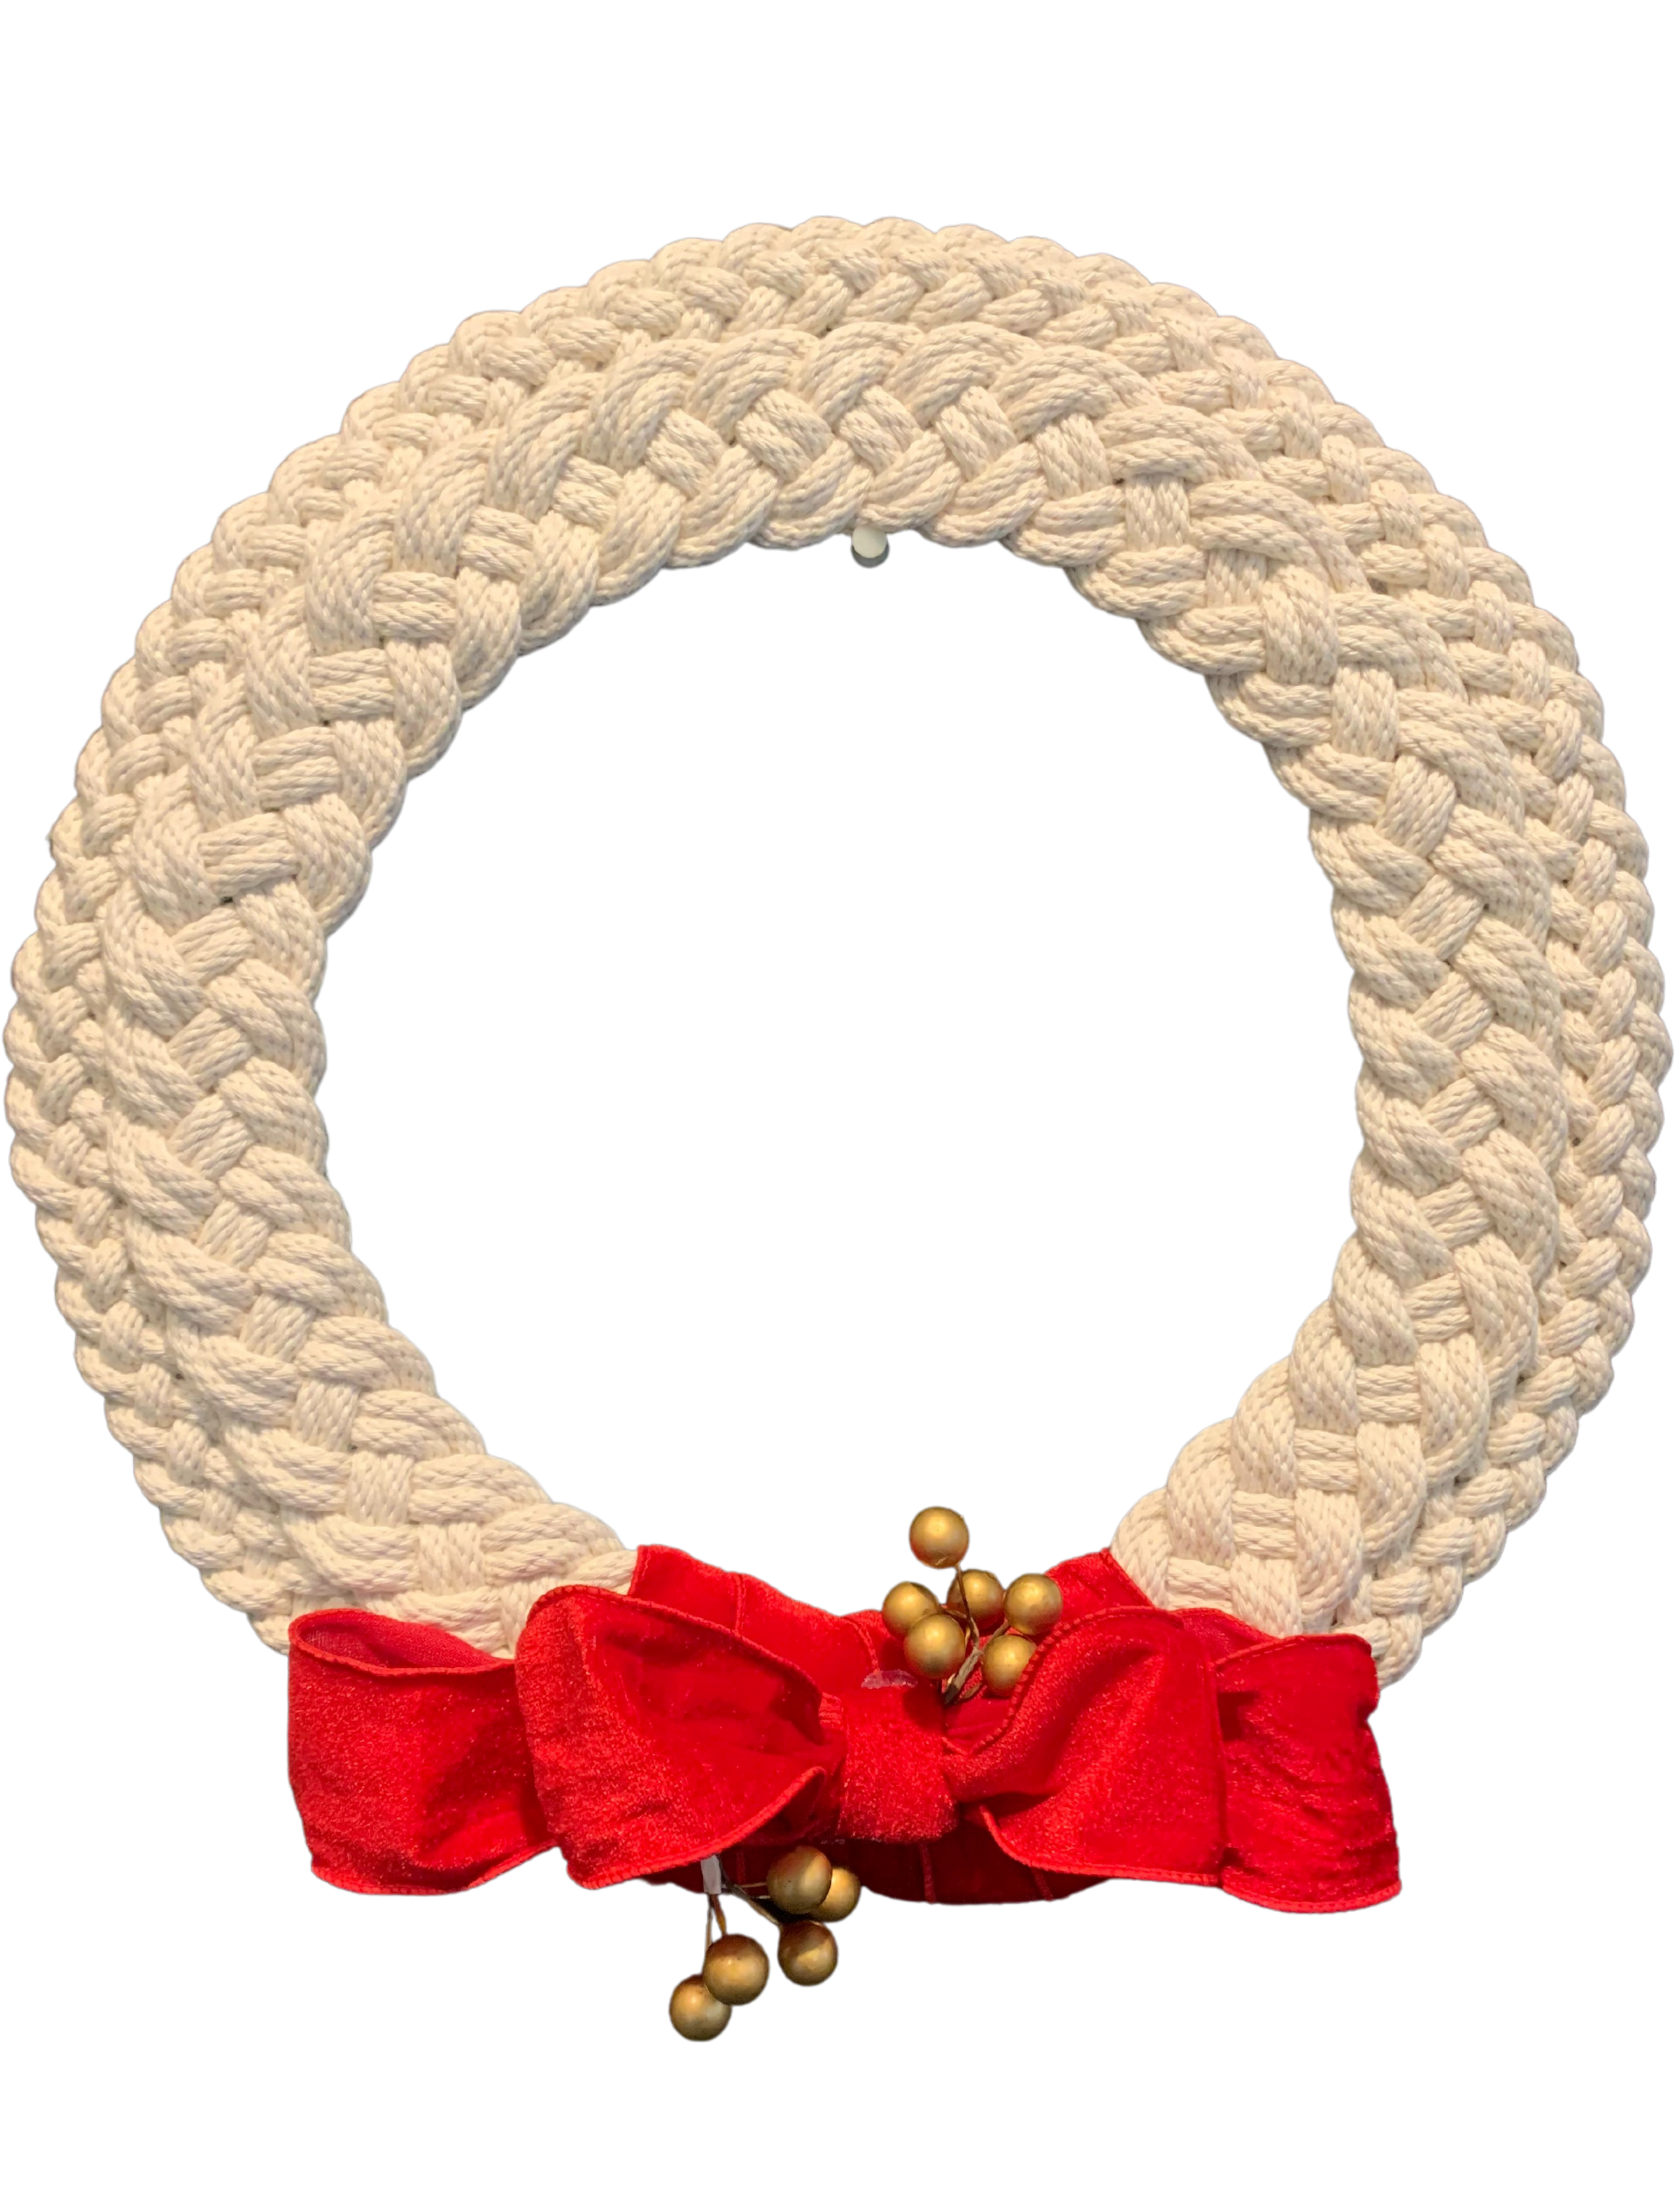 https://waylandlibrary.org/wp-content/uploads/2021/11/ropewreath.png